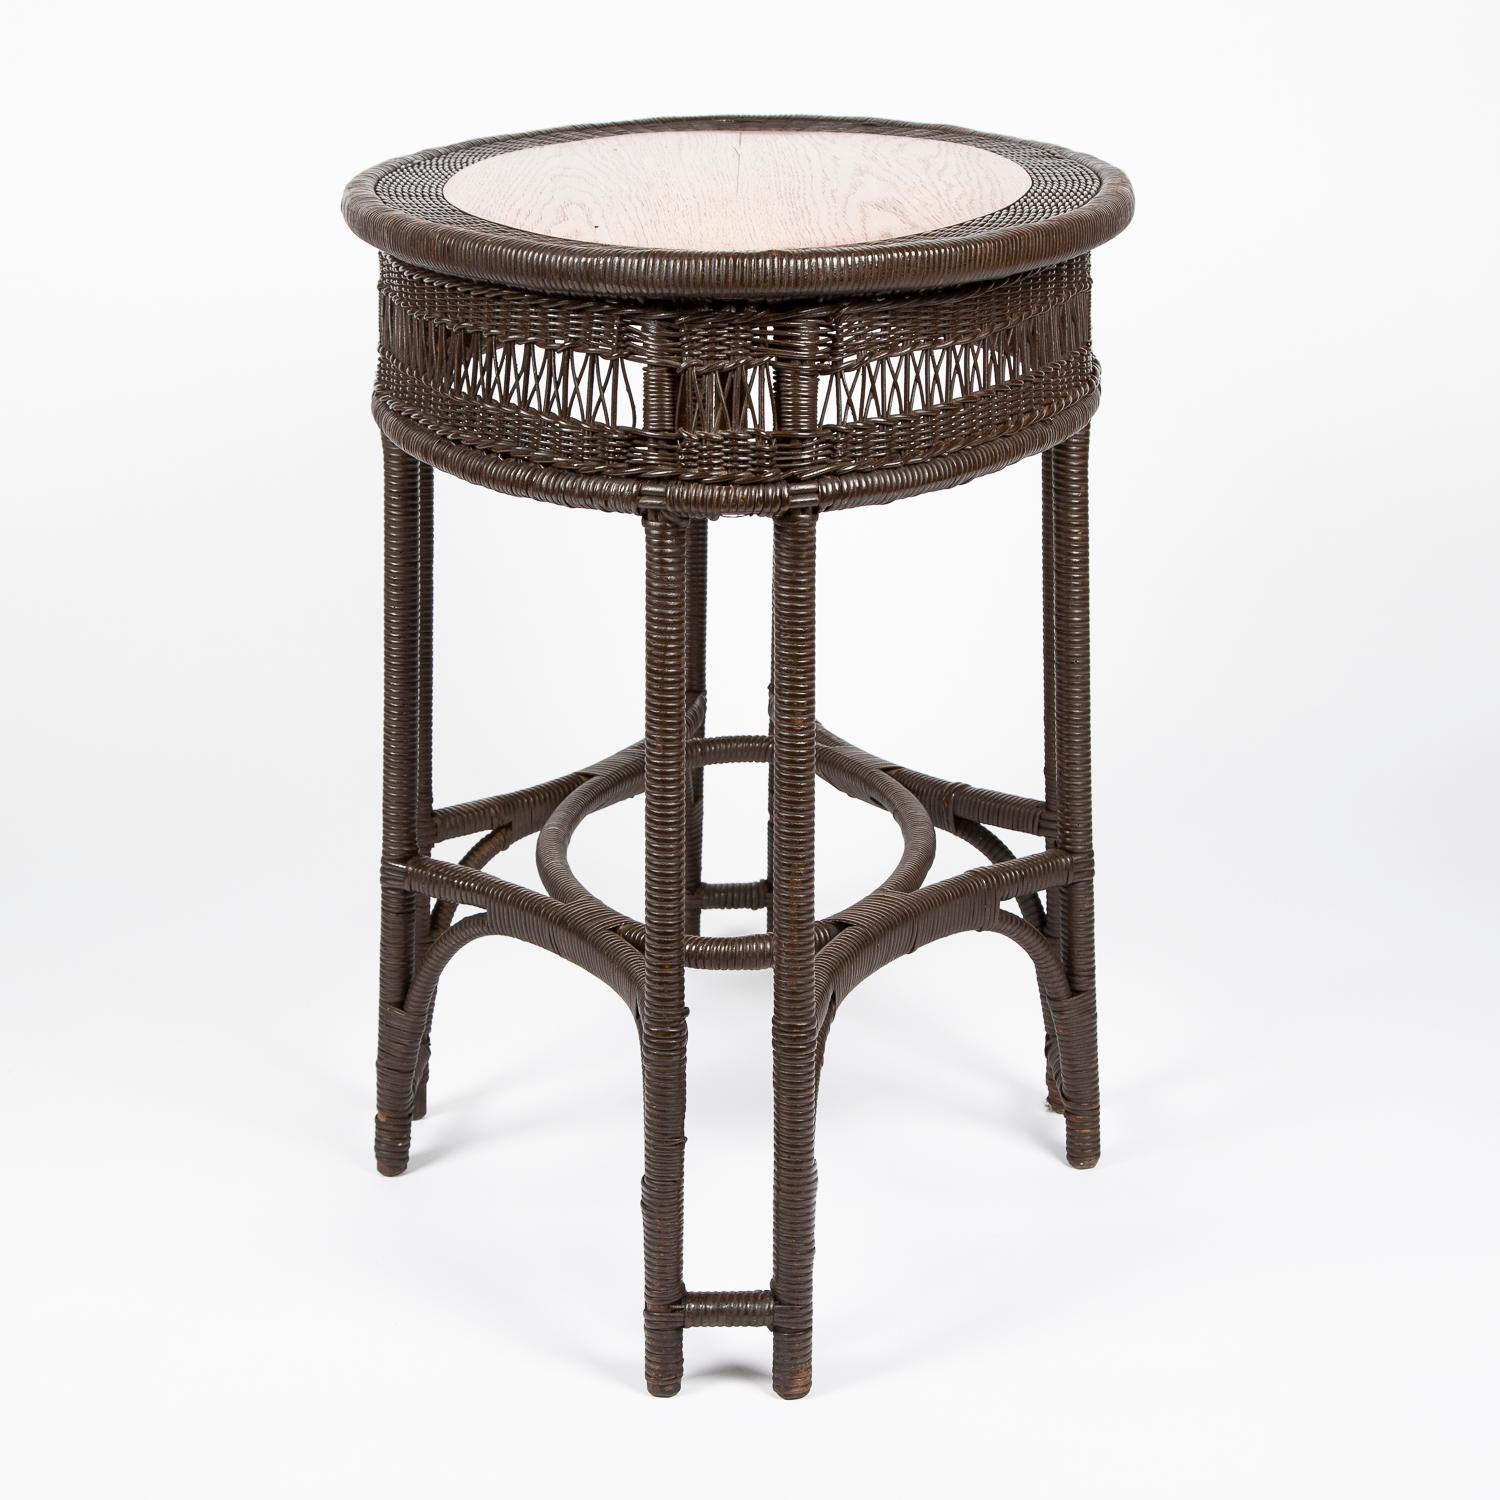 English Oak and Rattan Oval Table For Sale